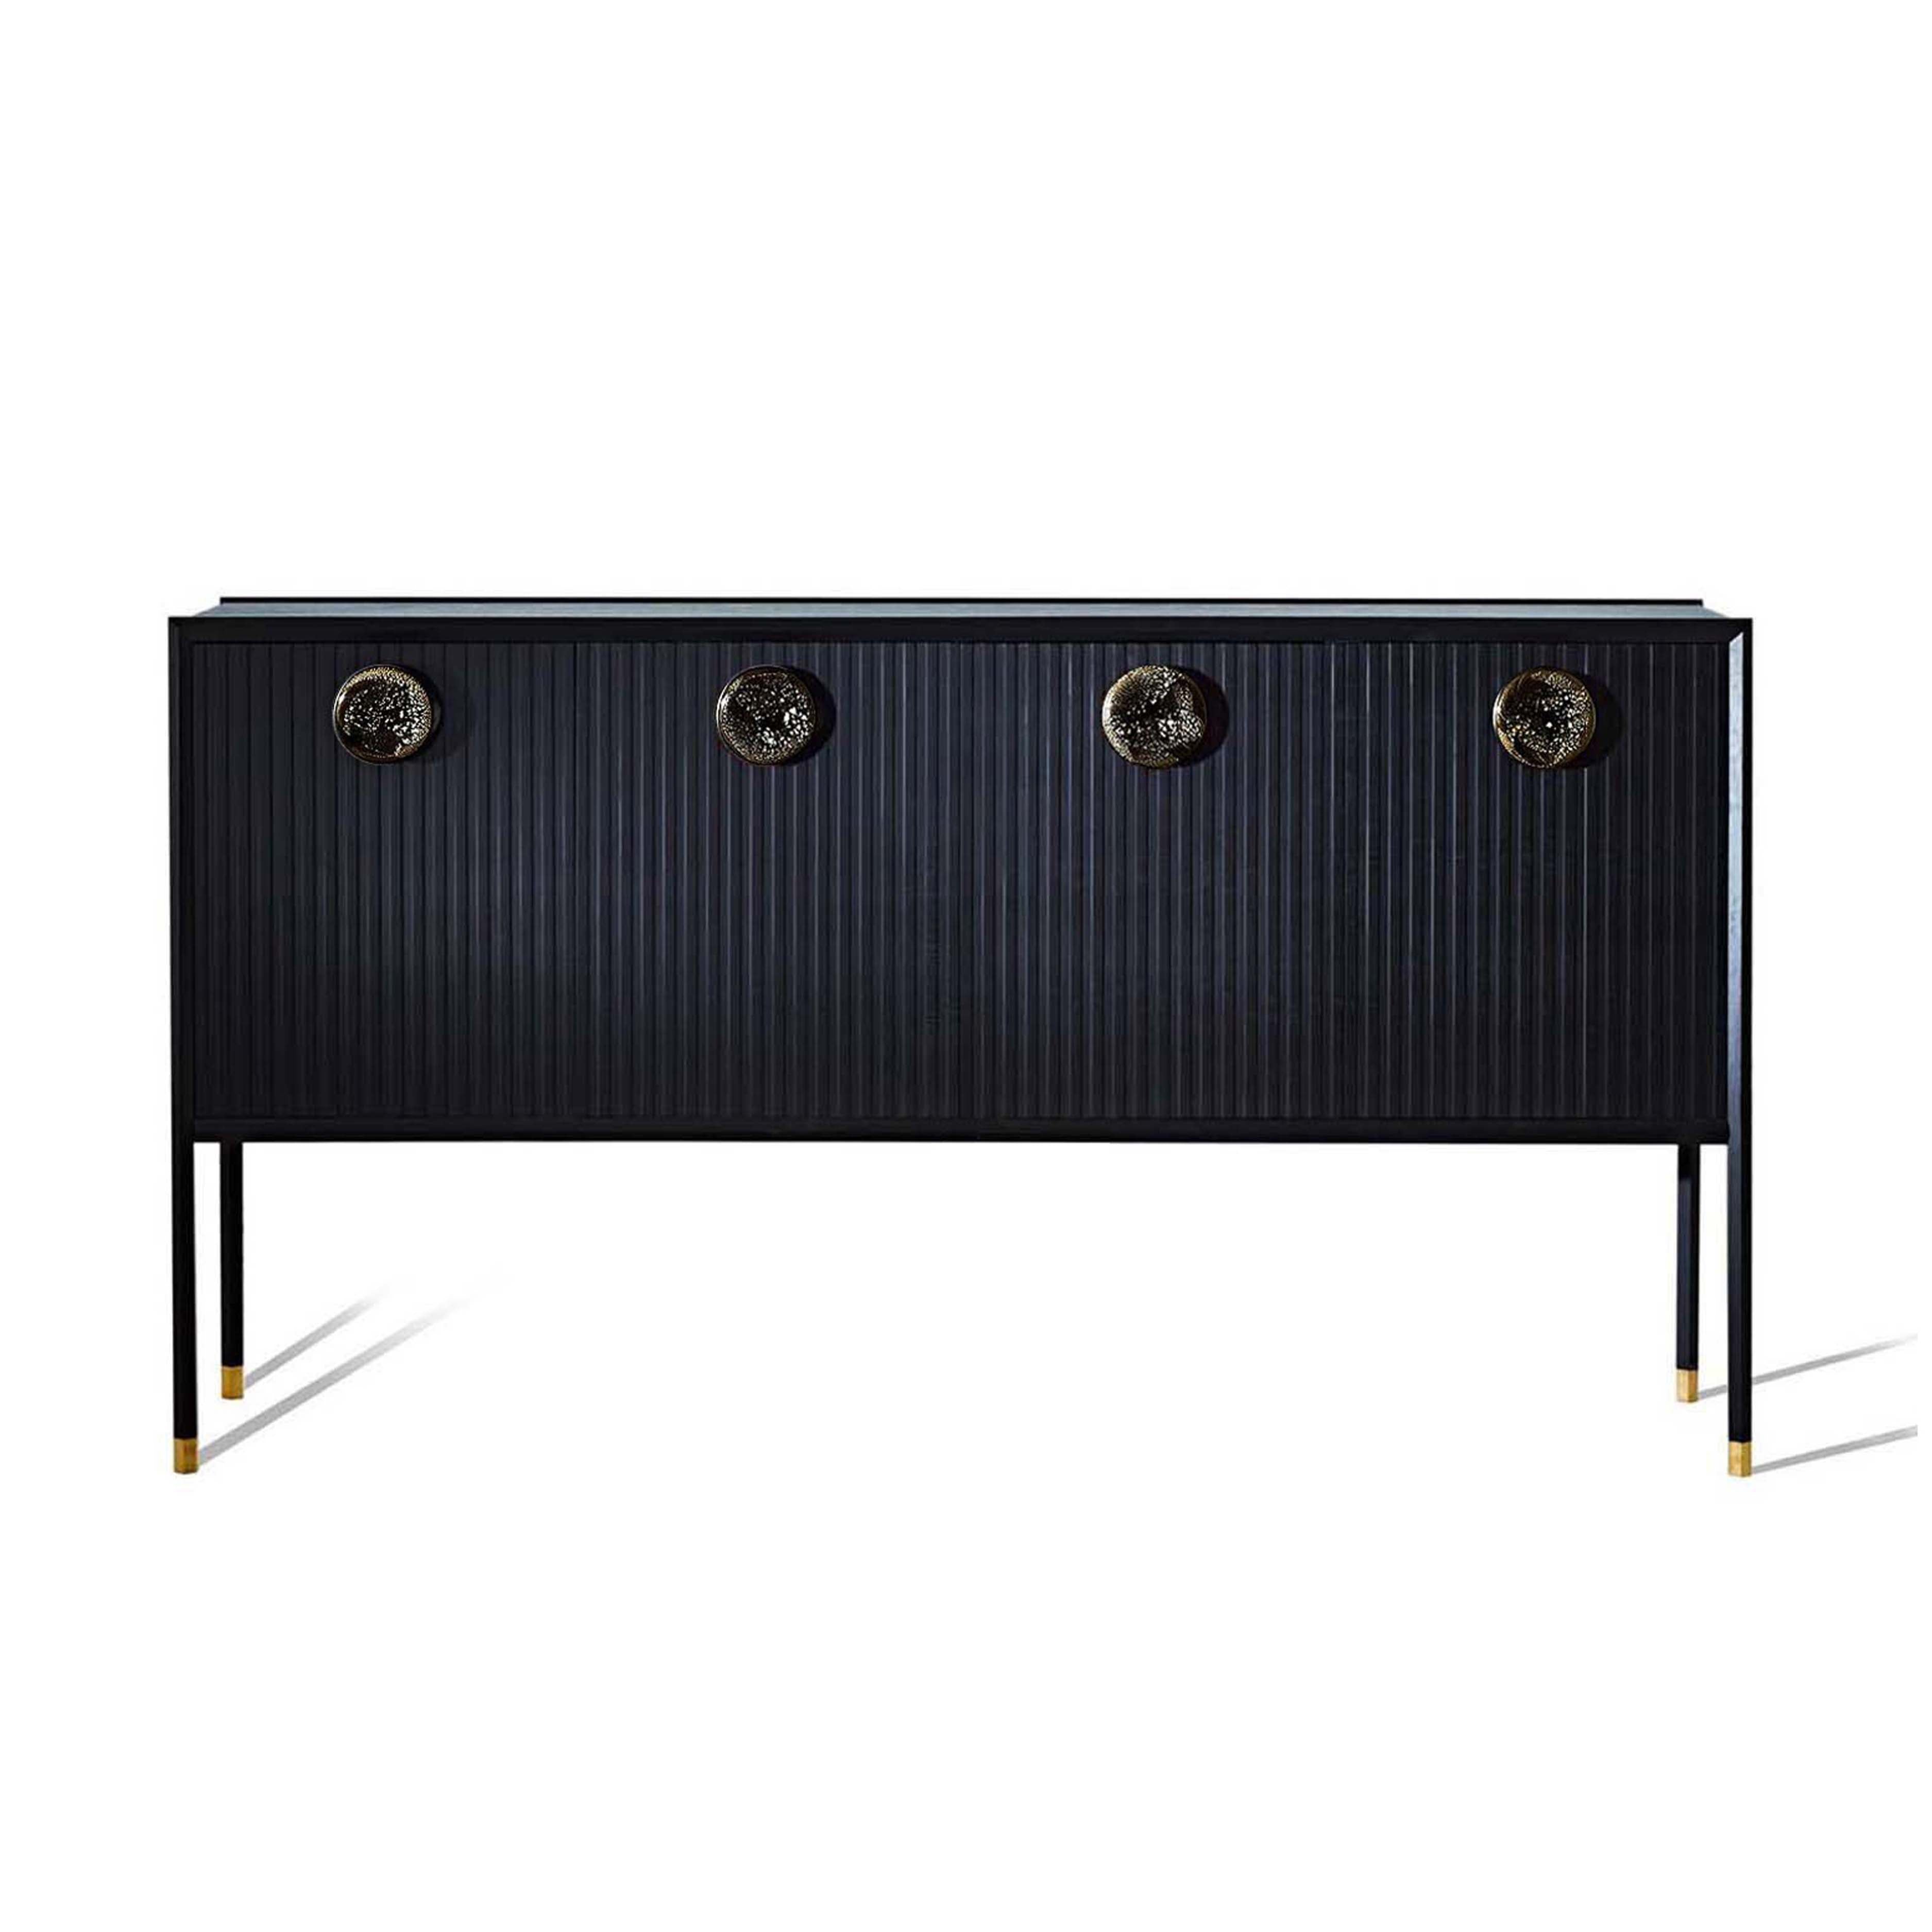 Halo Tall Buffet with Glass handles - Zuster Furniture